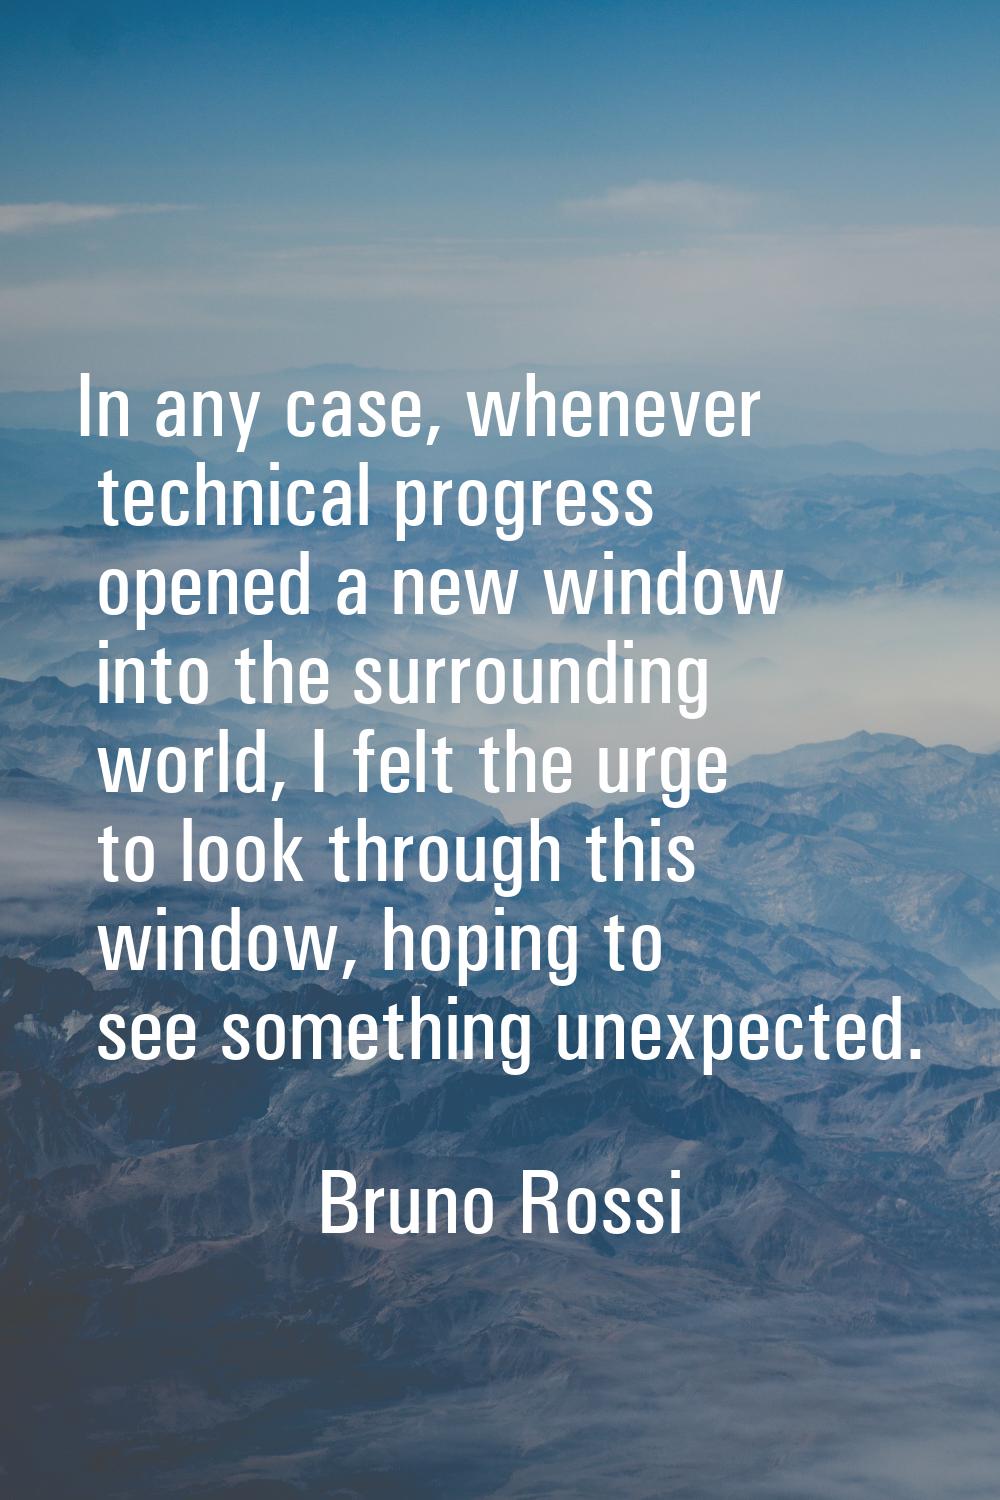 In any case, whenever technical progress opened a new window into the surrounding world, I felt the